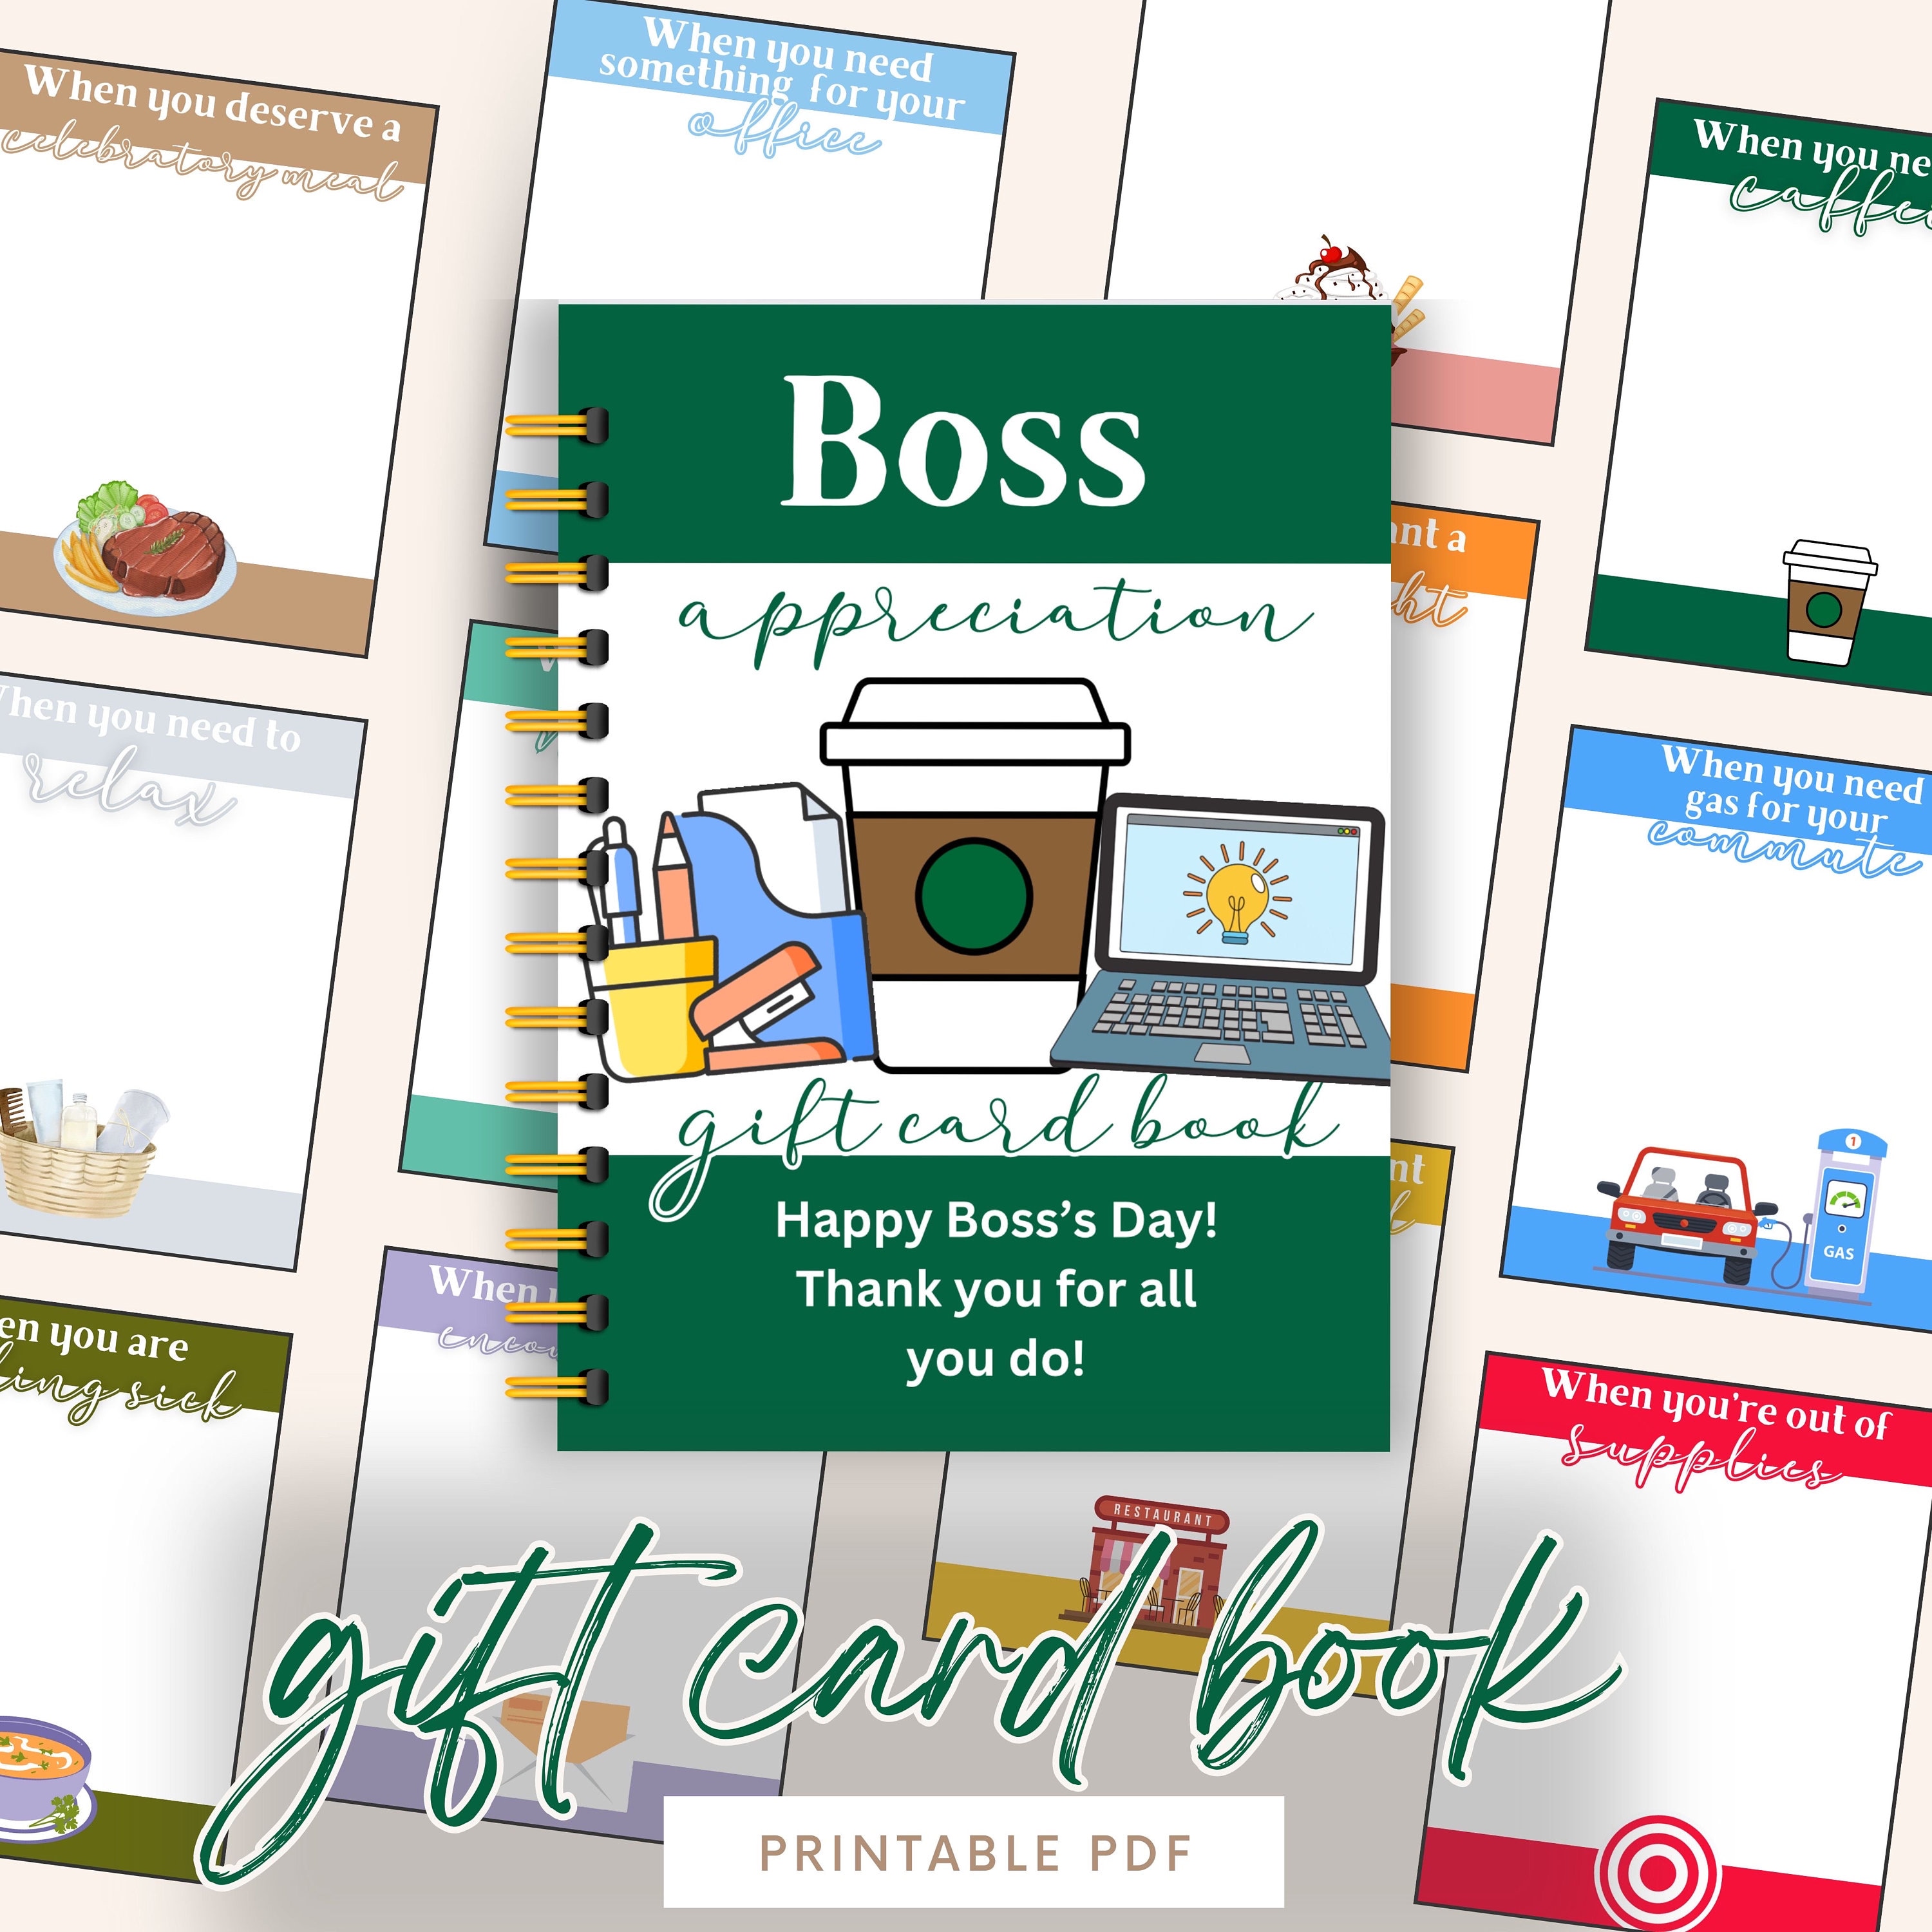 Bosss Day Gift Card Book, Boss Appreciation, Boss Care Package, Printable  Boss Gift Card Book, Gift for Boss From Employee, Thoughtful Gift 